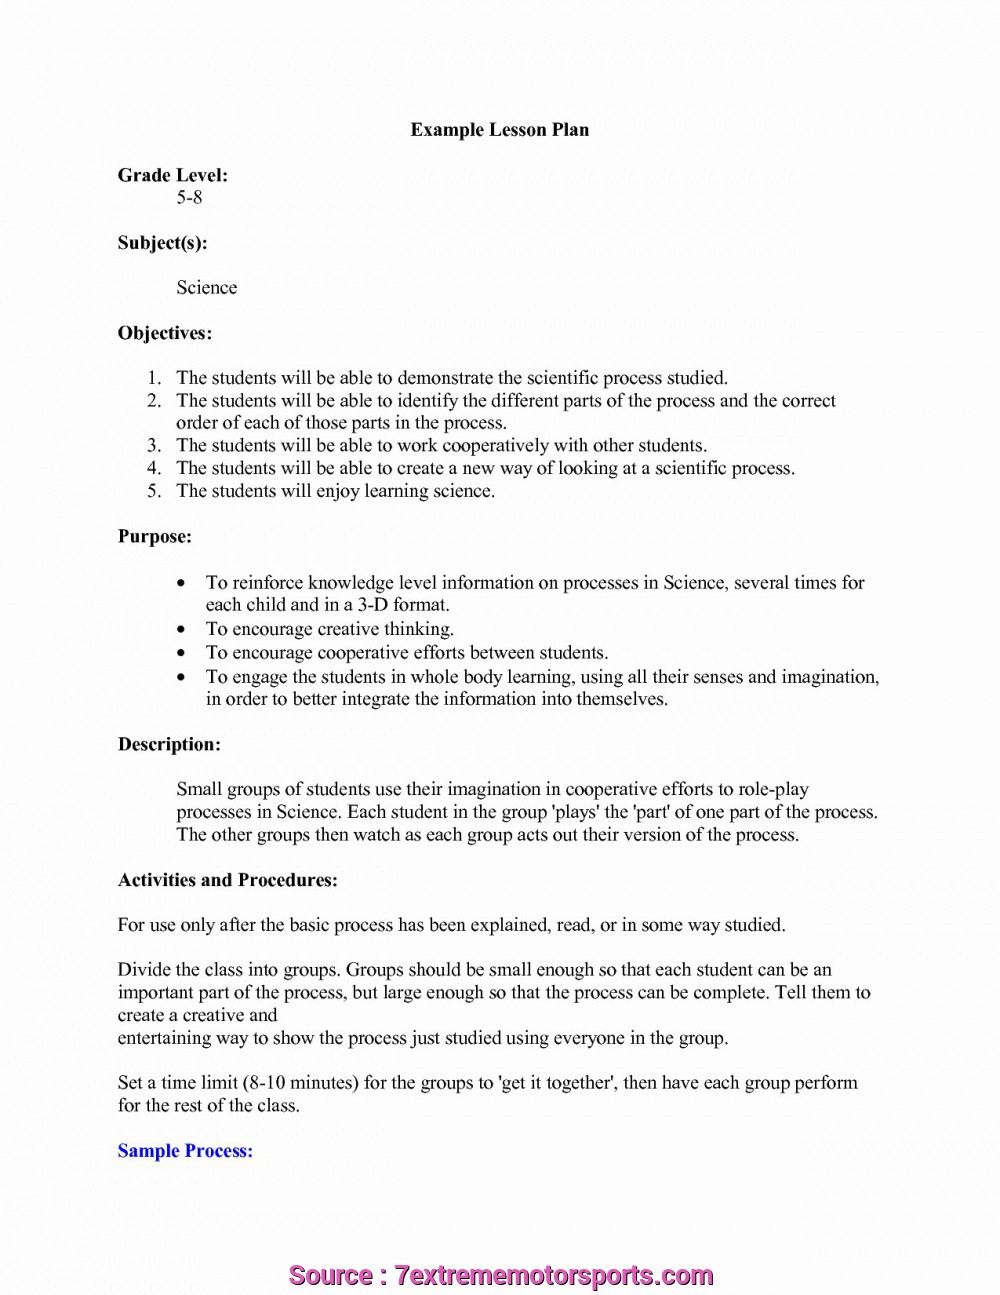 Lesson Plan Objectives Lesson Plan Template with Objectives 5 top Risks